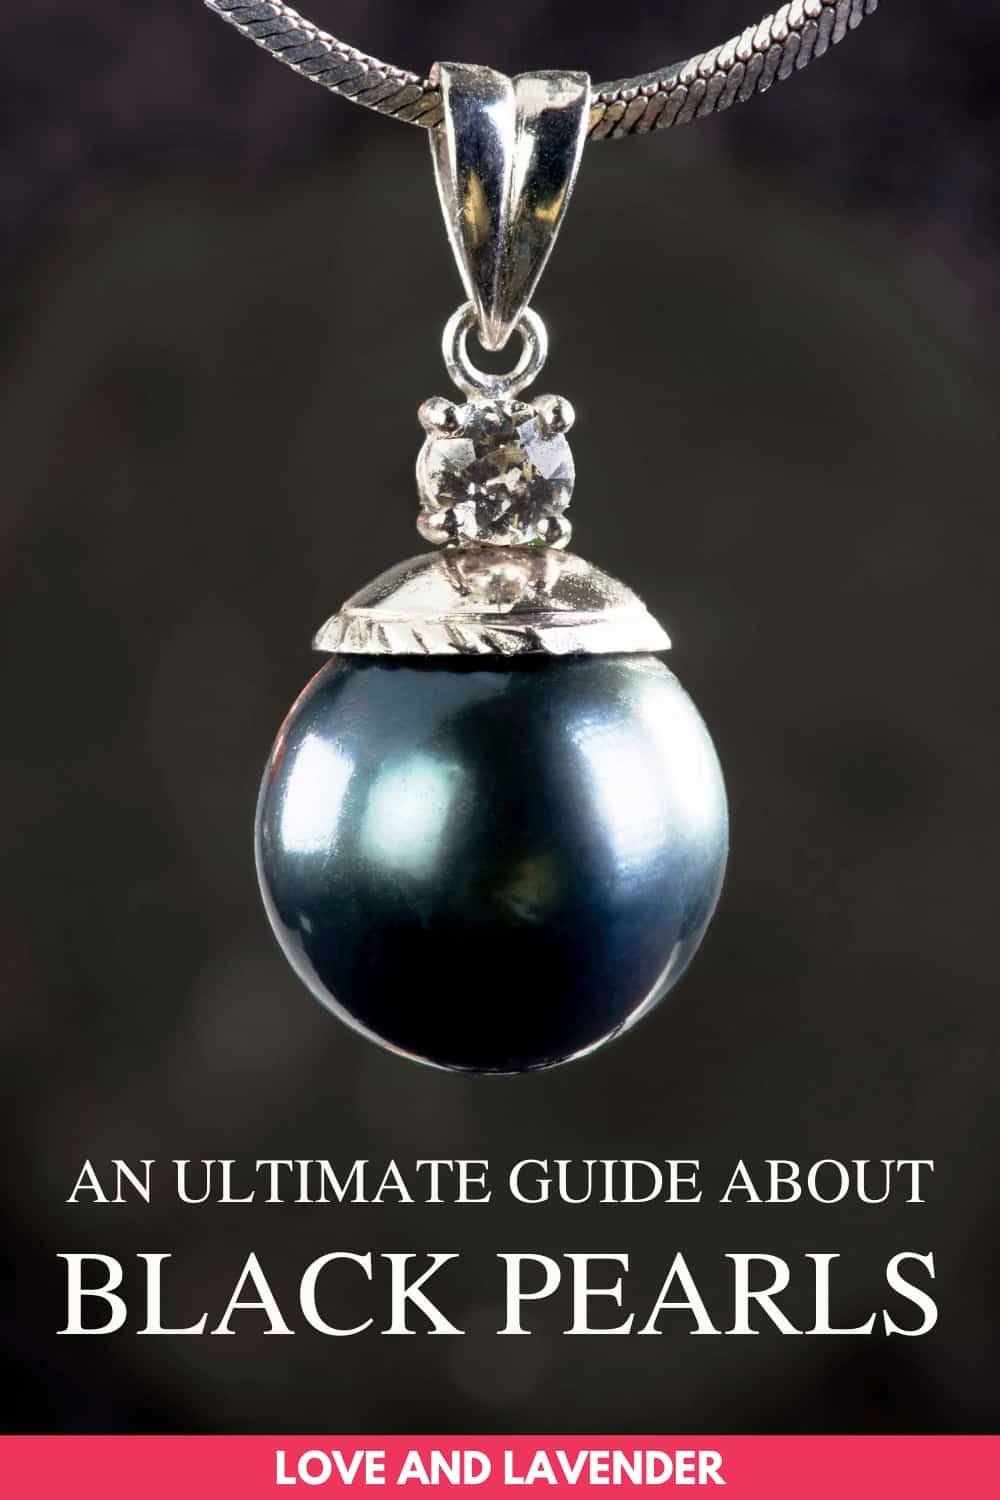 Pinterest pin - guide about black pearls